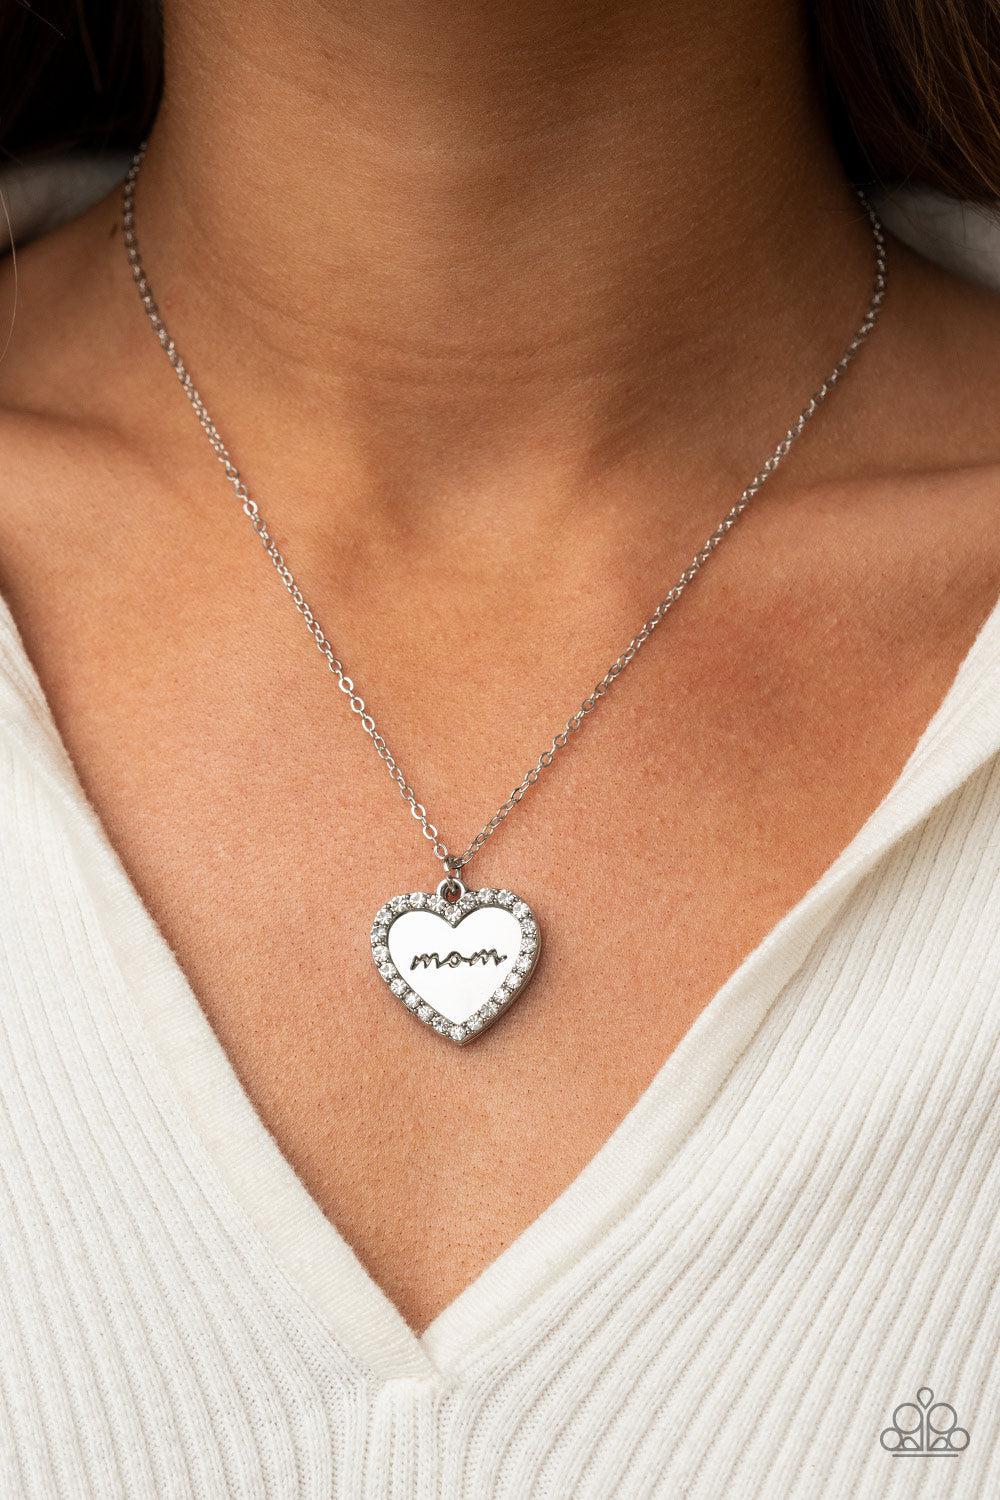 The Real Boss White Rhinestone Heart Necklace - Paparazzi Accessories- lightbox - CarasShop.com - $5 Jewelry by Cara Jewels